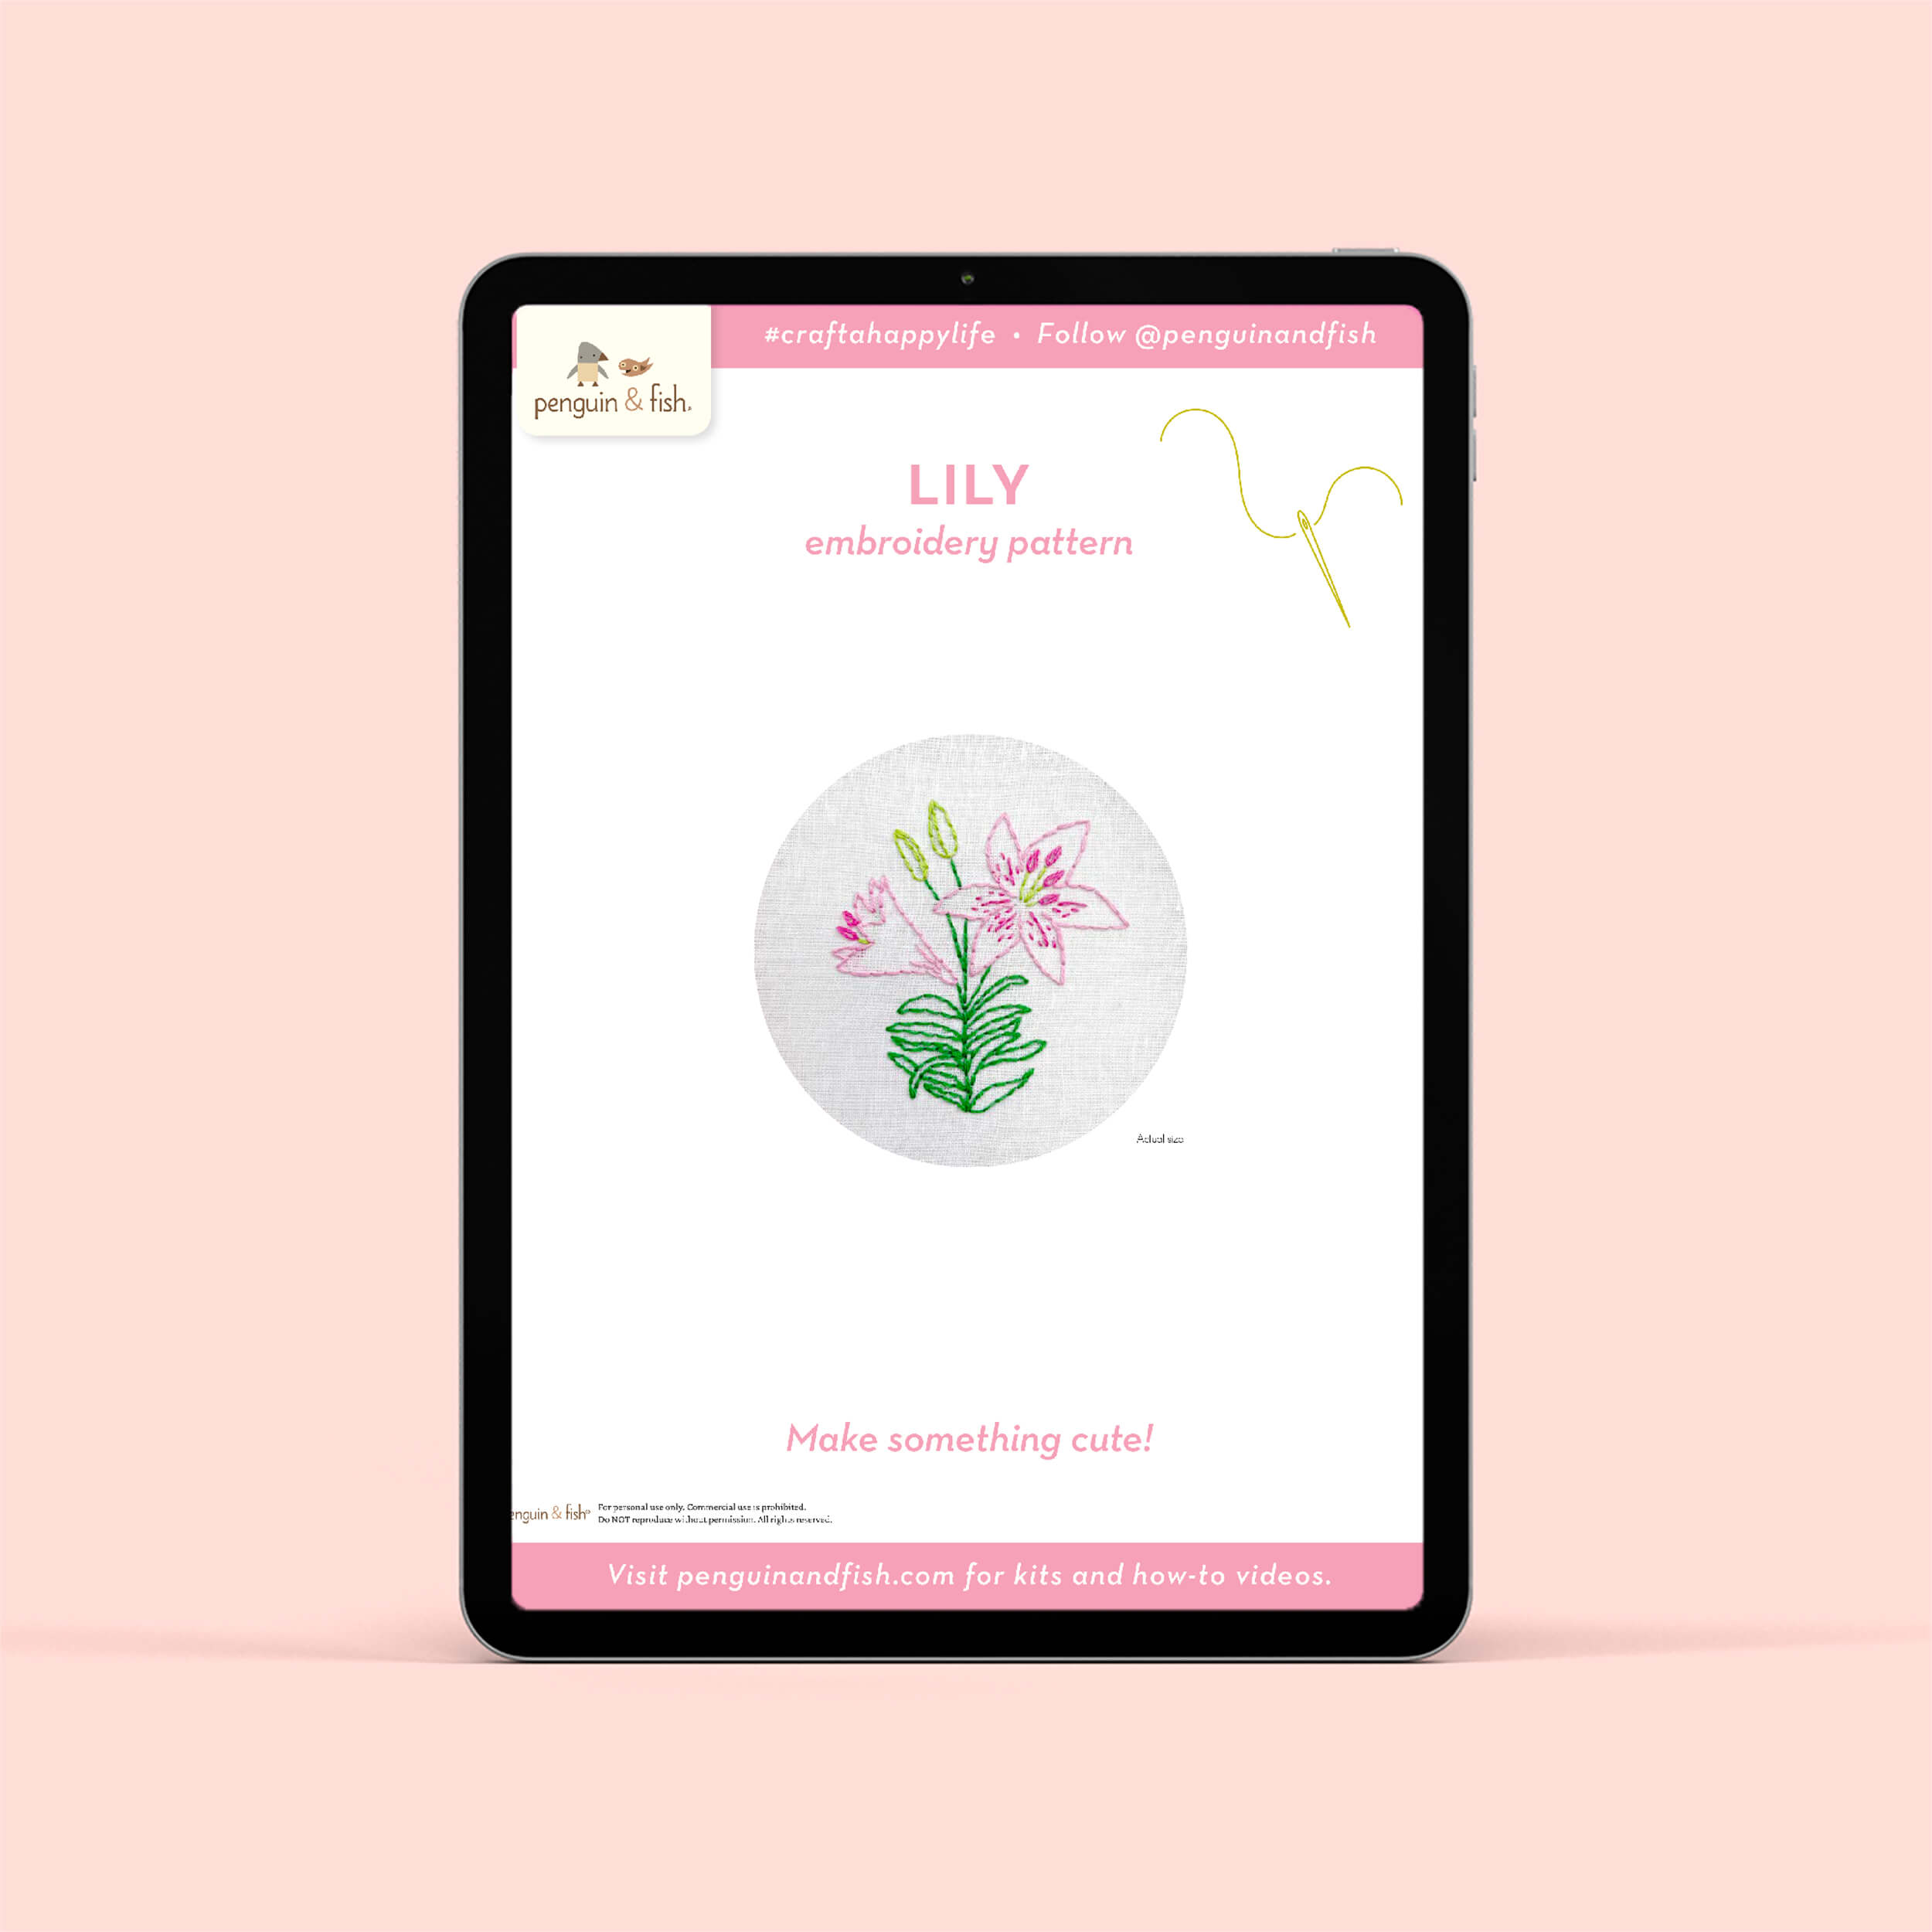 Lily PDF embroidery pattern shown on a tablet